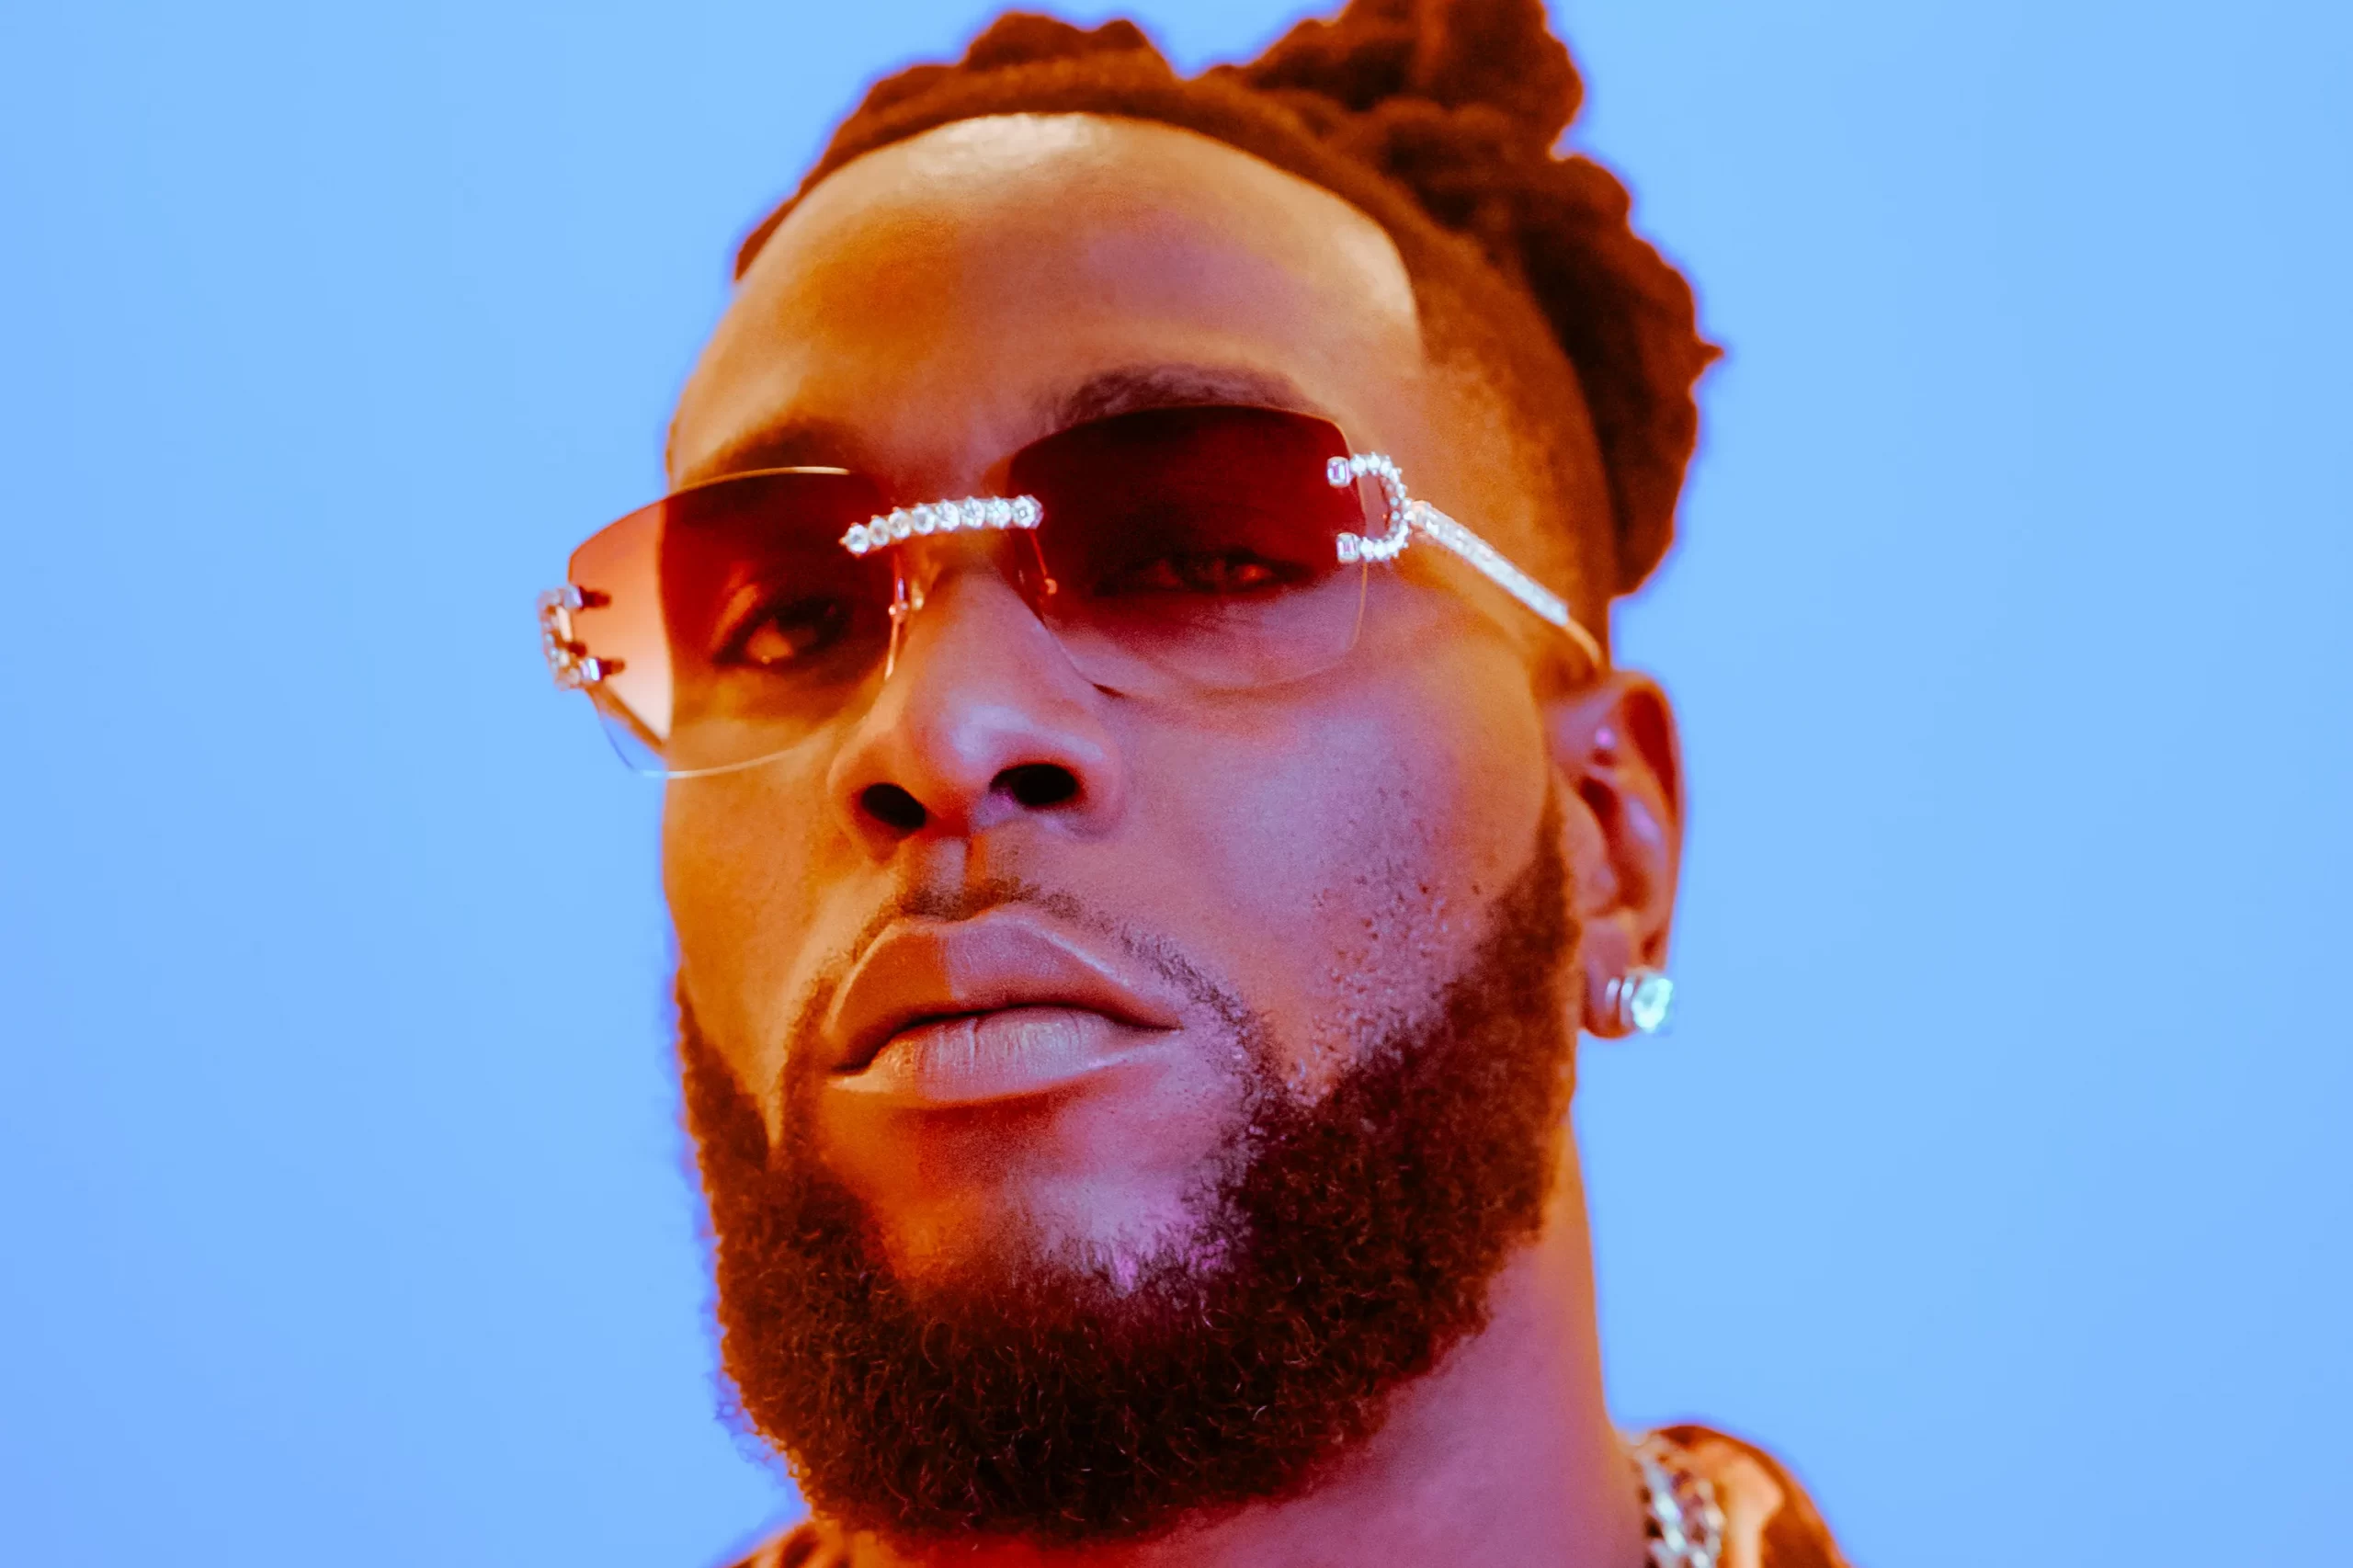 Burna Boy Beats Wizkid, Davido As First African Artiste To Sell Out State Farm Arena In Atlanta (Video), Burna Boy Beats Wizkid, Davido As First African Artiste To Sell Out State Farm Arena In Atlanta (Video), INFINITY LOADED